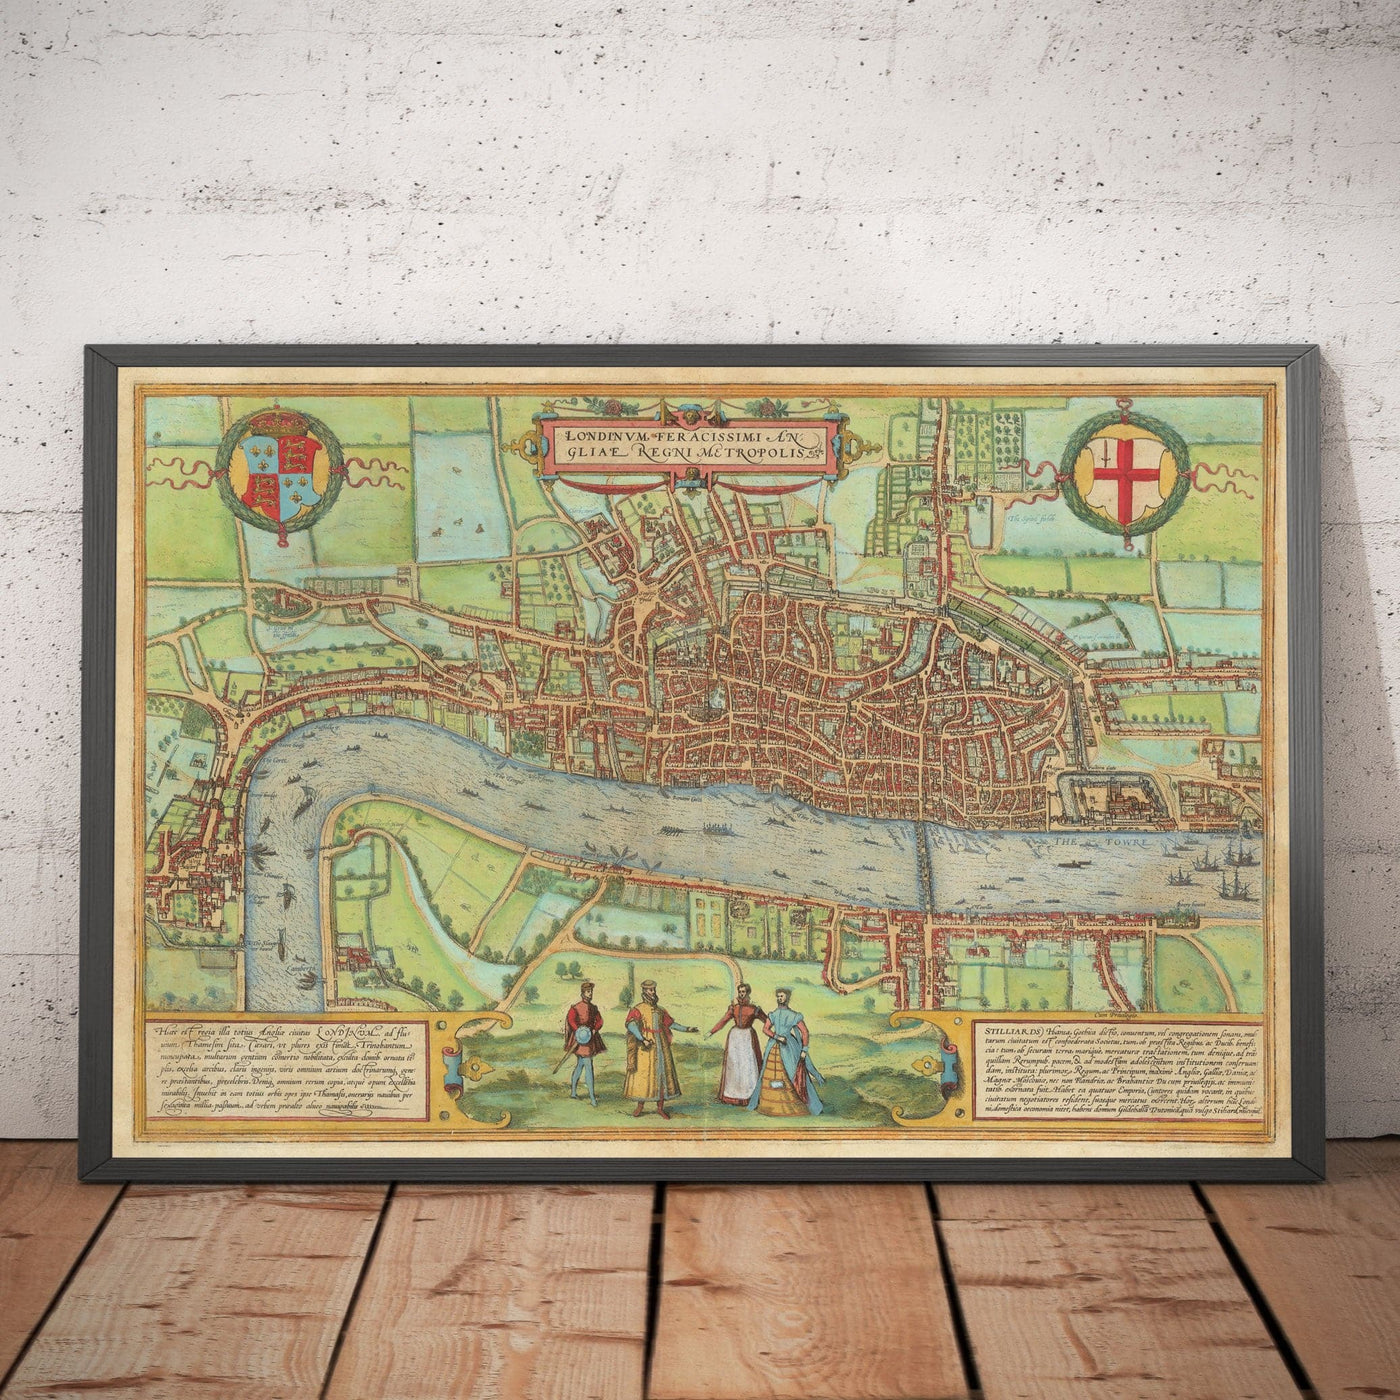 The Oldest Map of London, 1559 - City of London, Westminster, Southwark